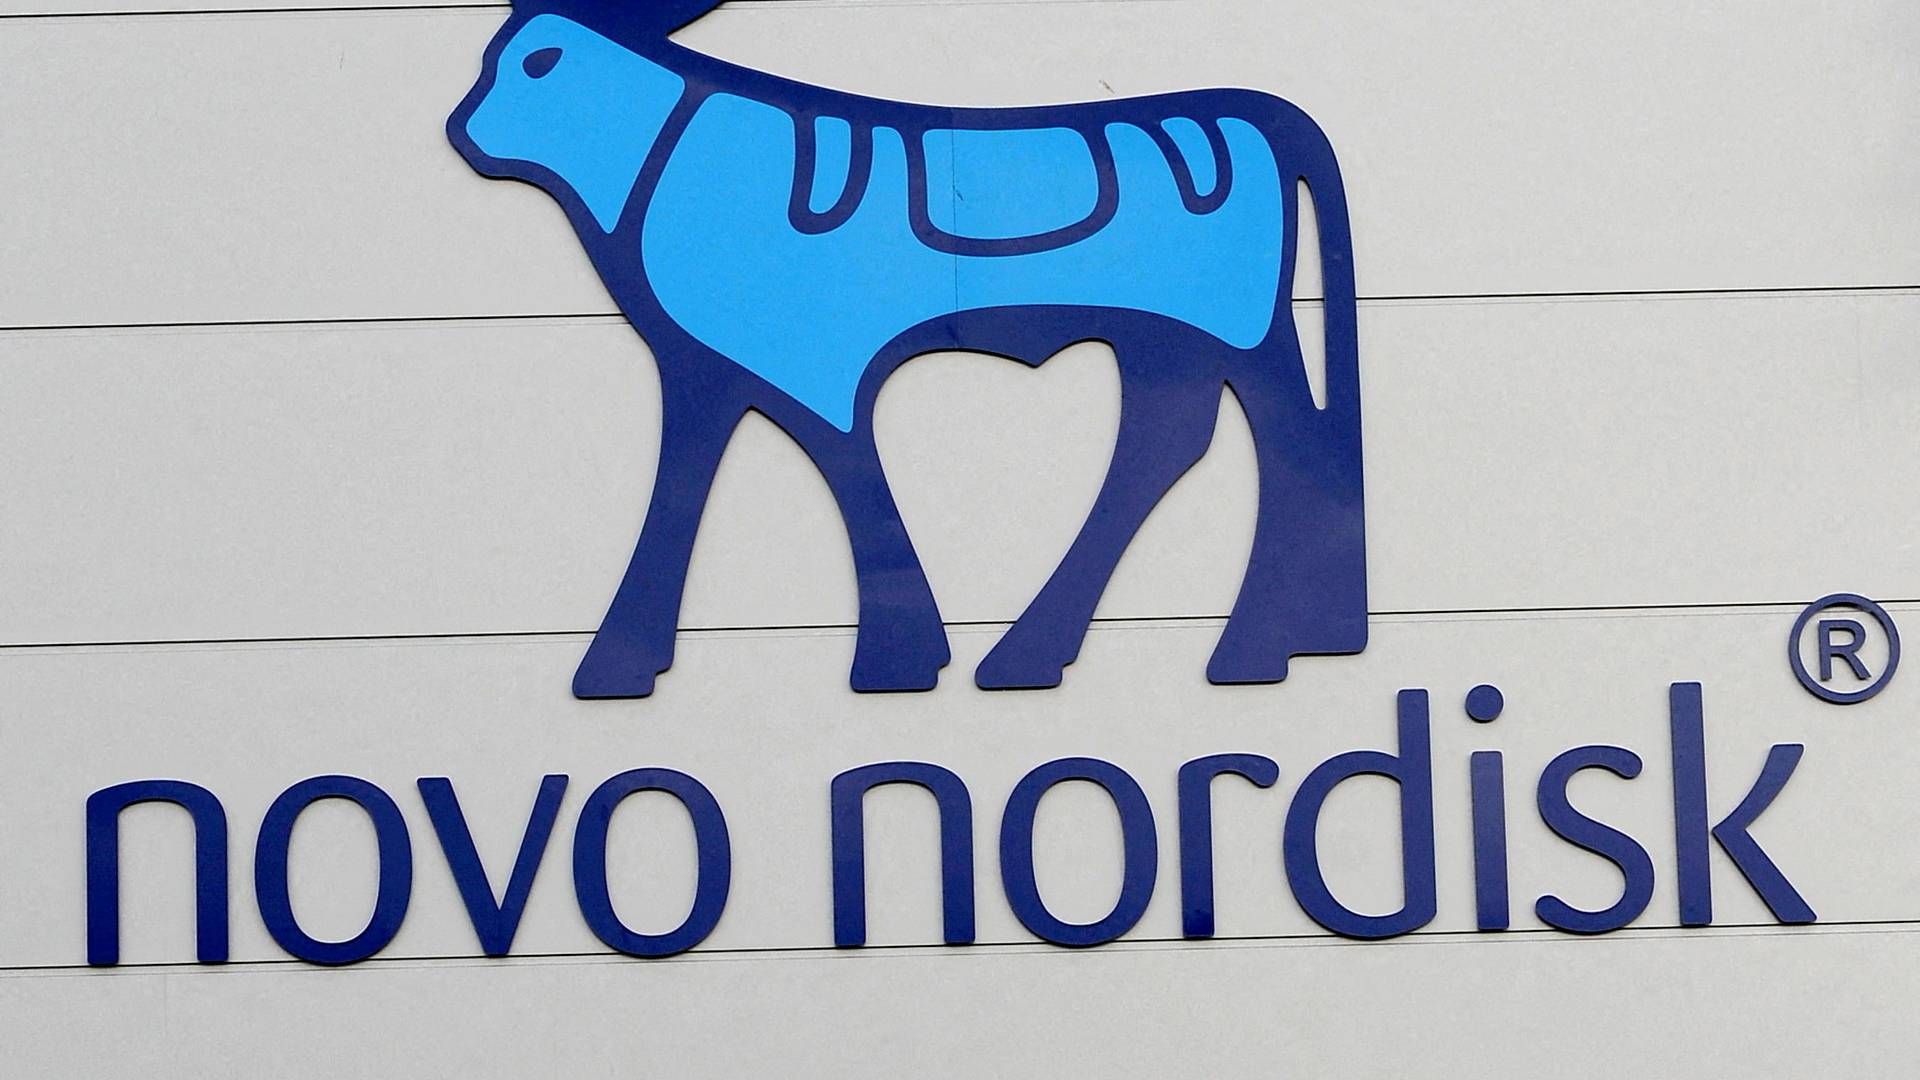 Novo Nordisk briefly overtakes LVMH as Europe's most valuable company